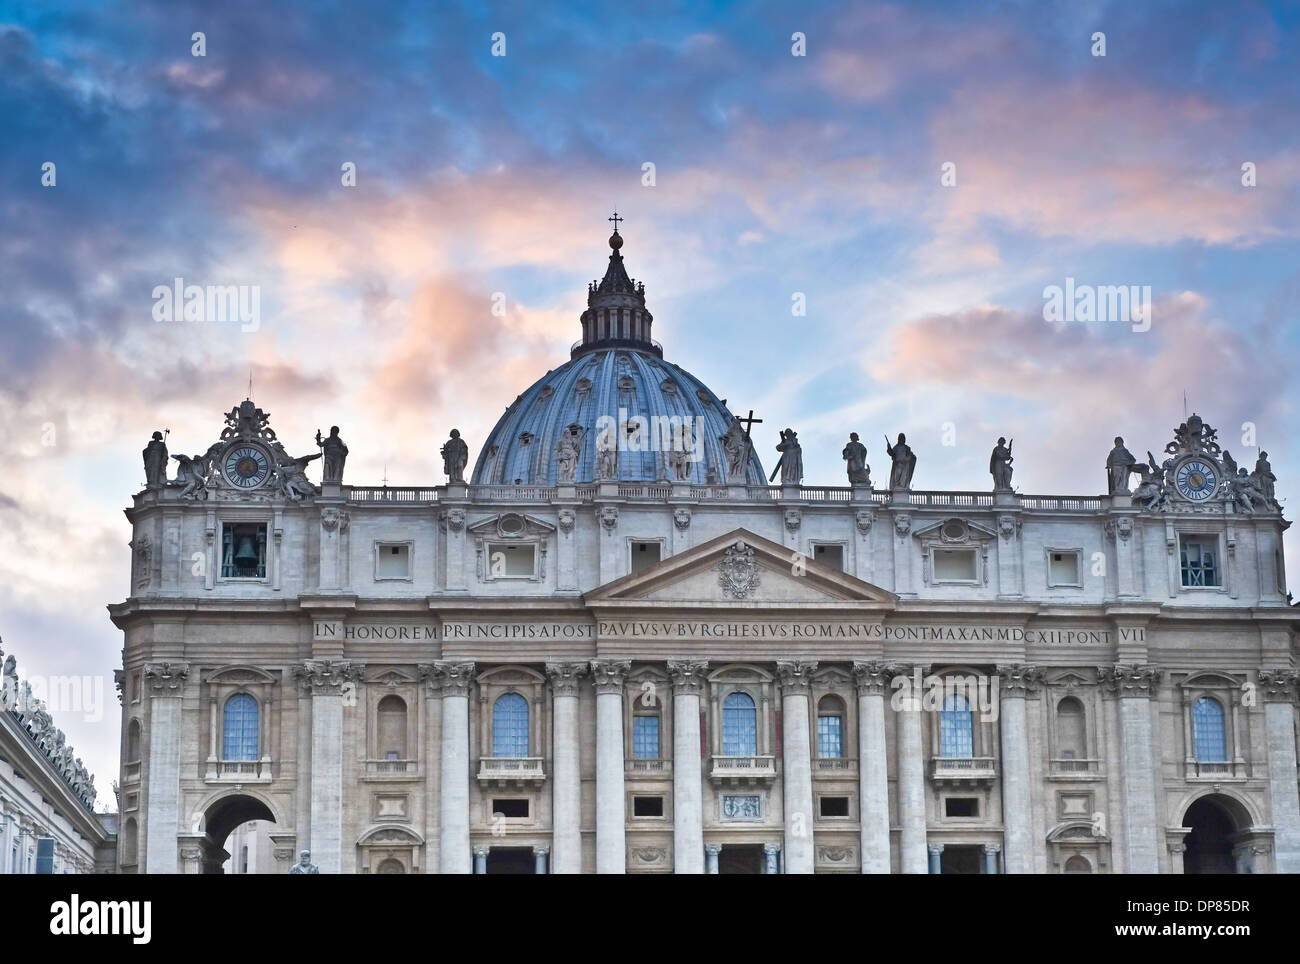 St Peter's Basilica in Vatican Rome Italy Stock Photo